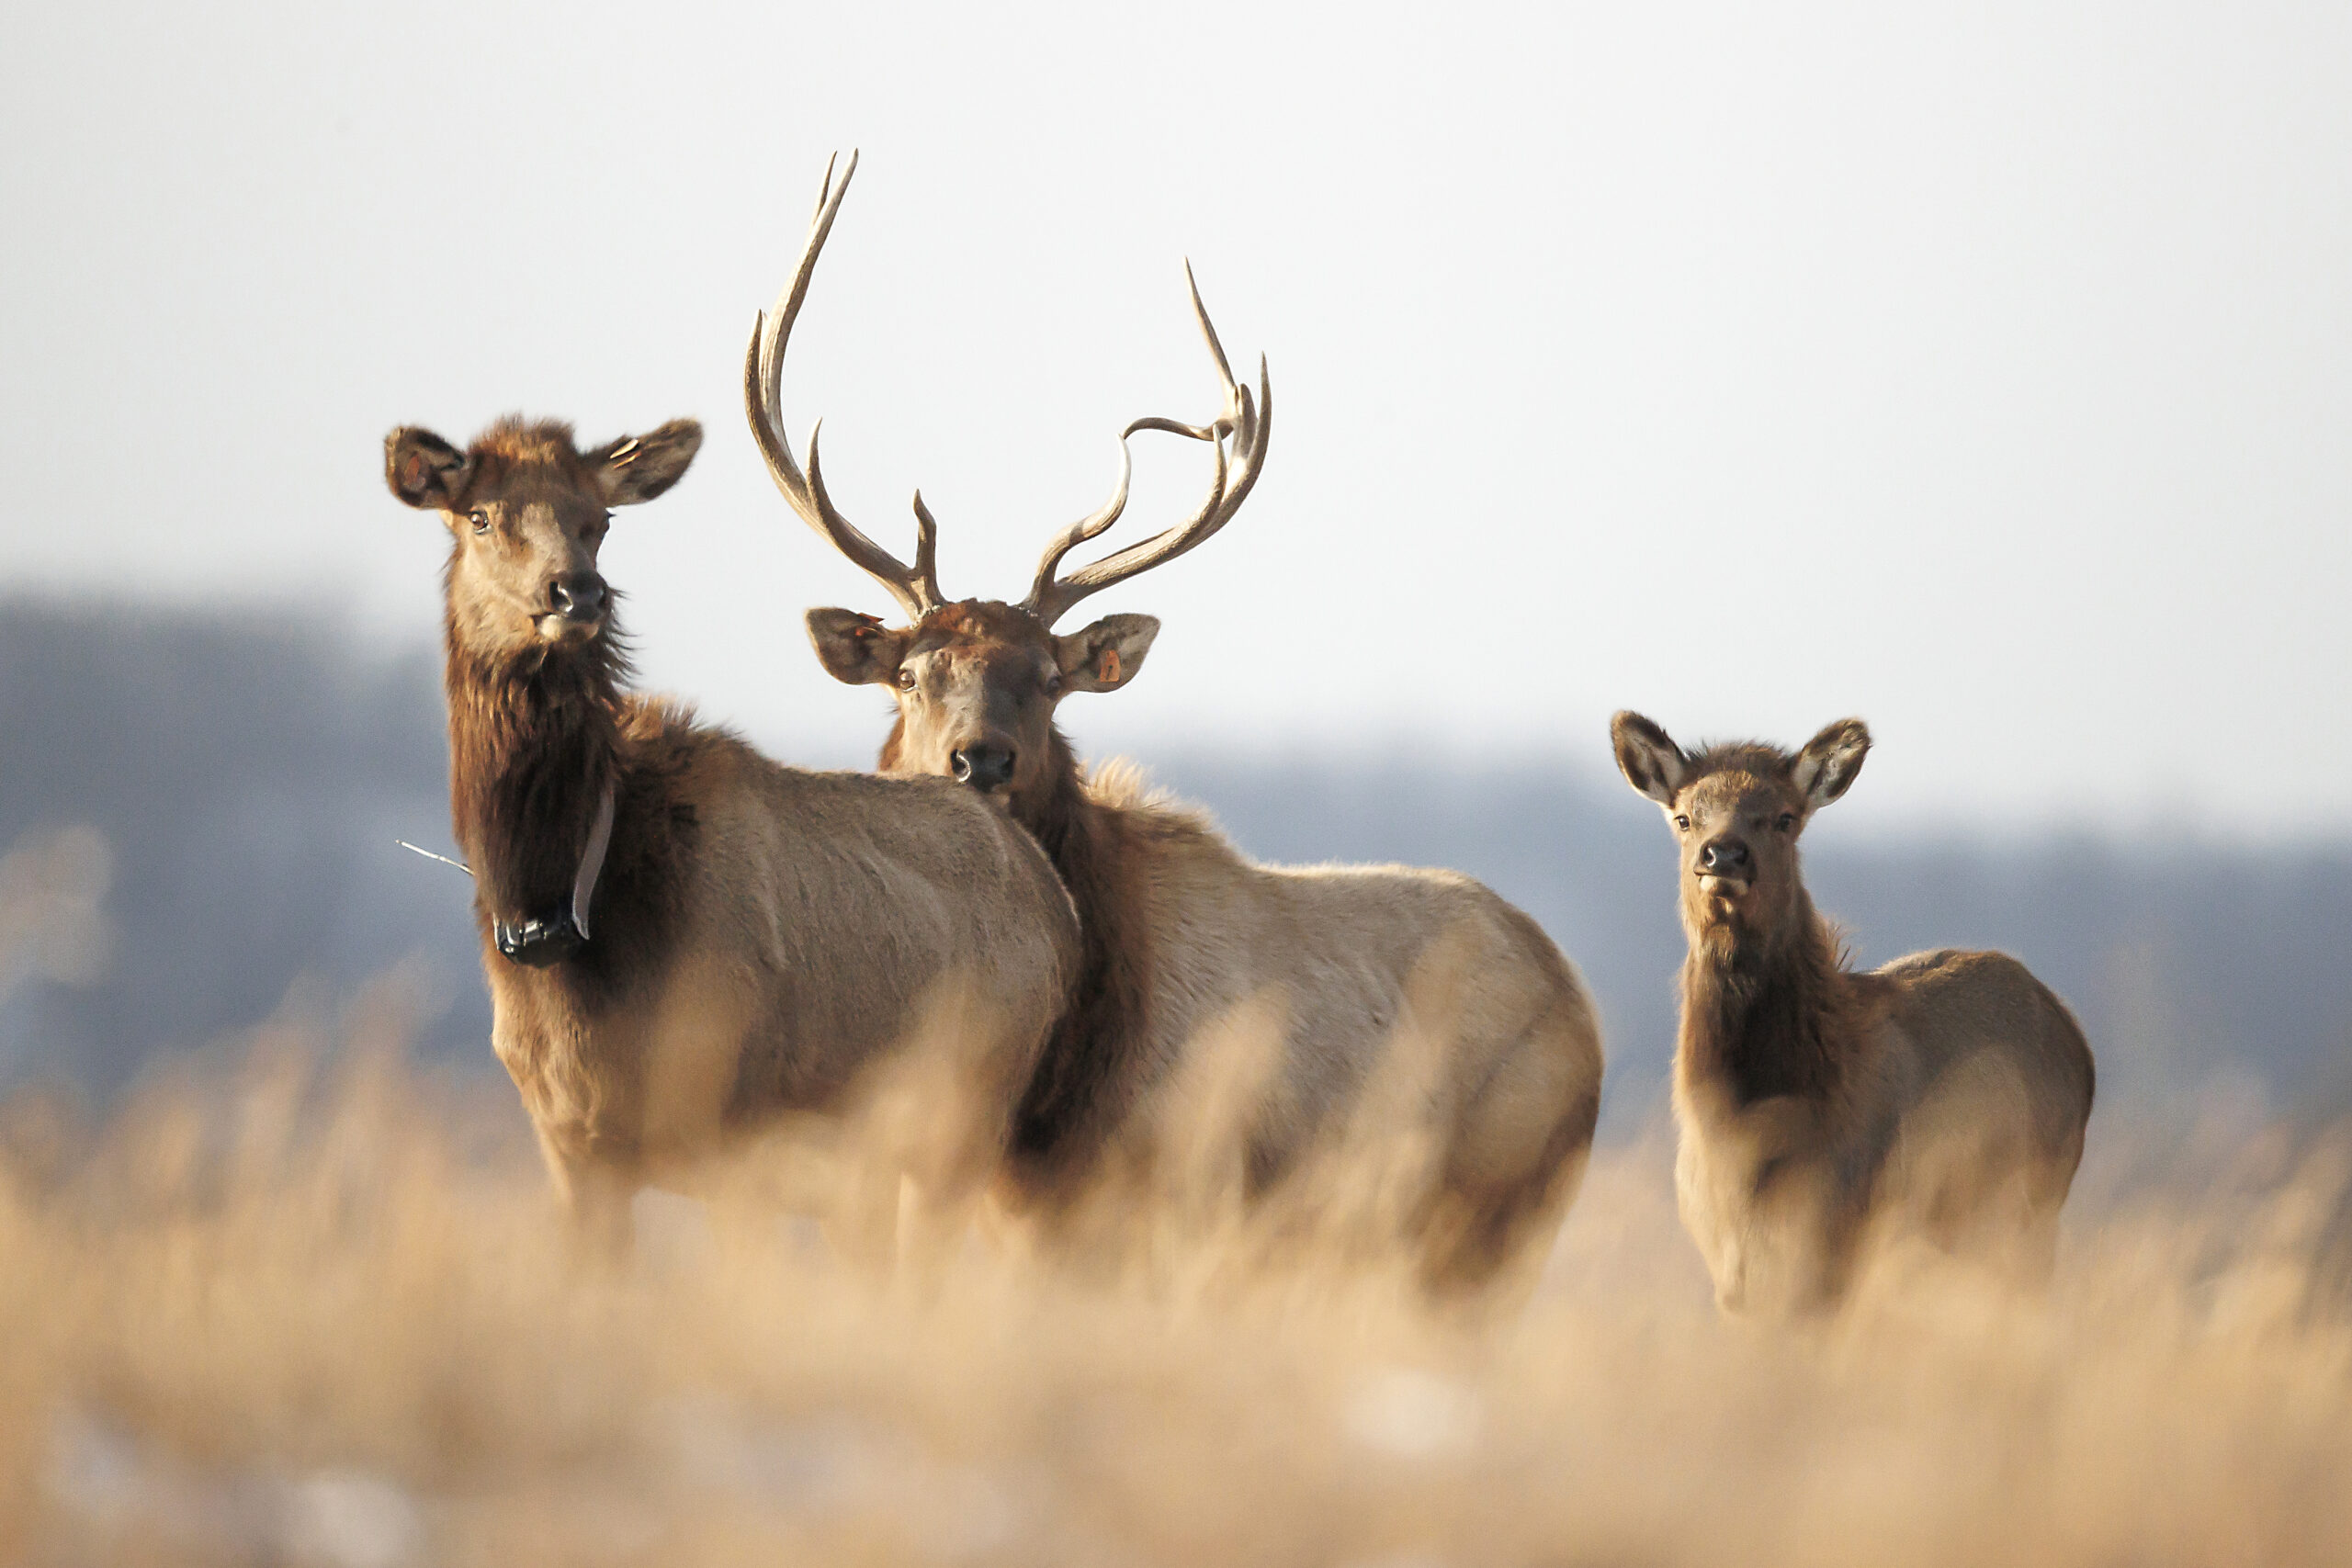 WVU genomics lab assesses stability of West Virginia elk herd as species recovers from 200-year absence – Dominion Post